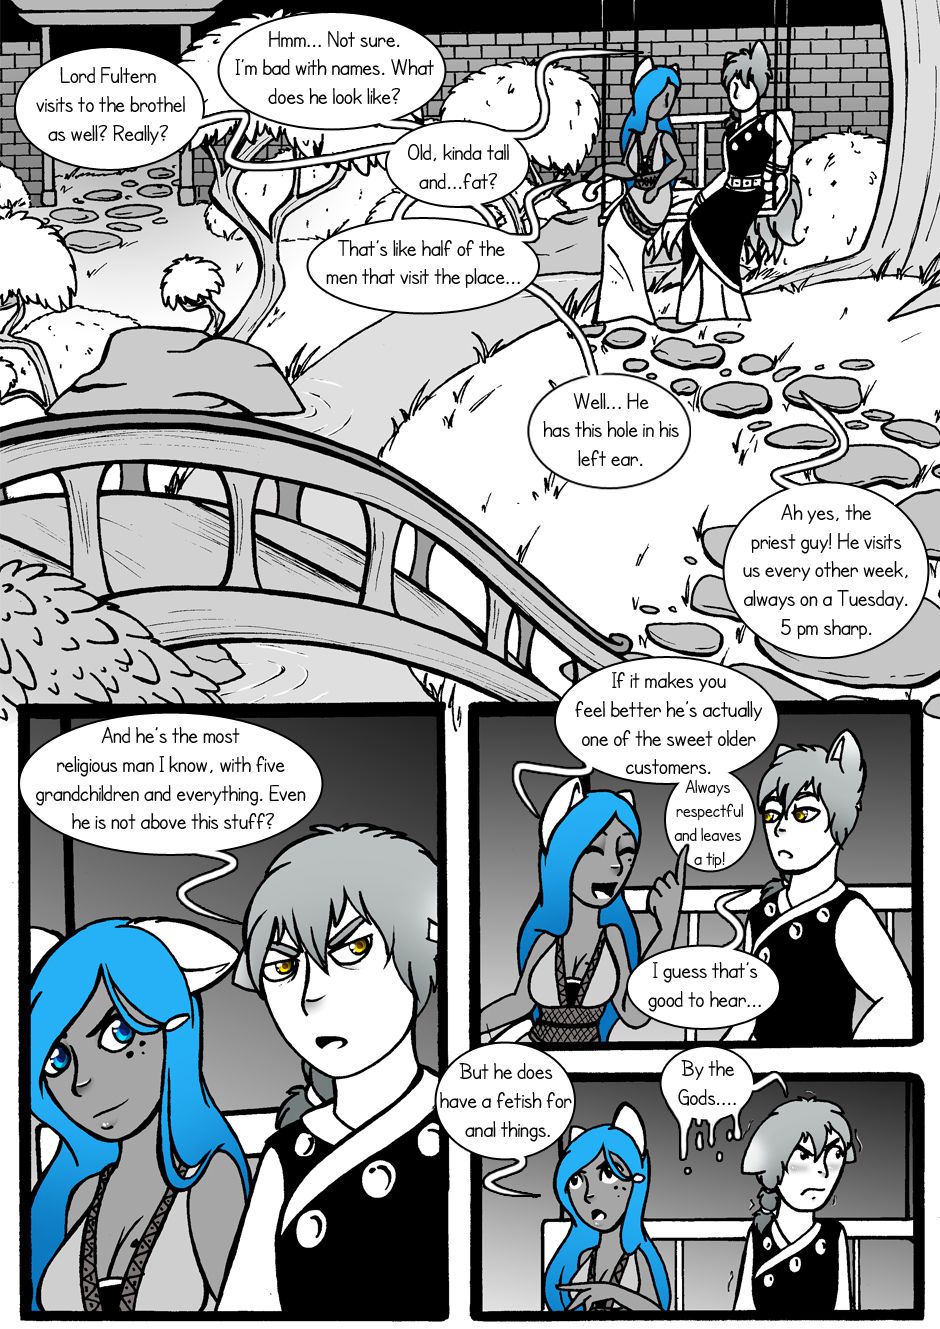 [Jeny-jen94] Between Kings and Queens [Ongoing] 58